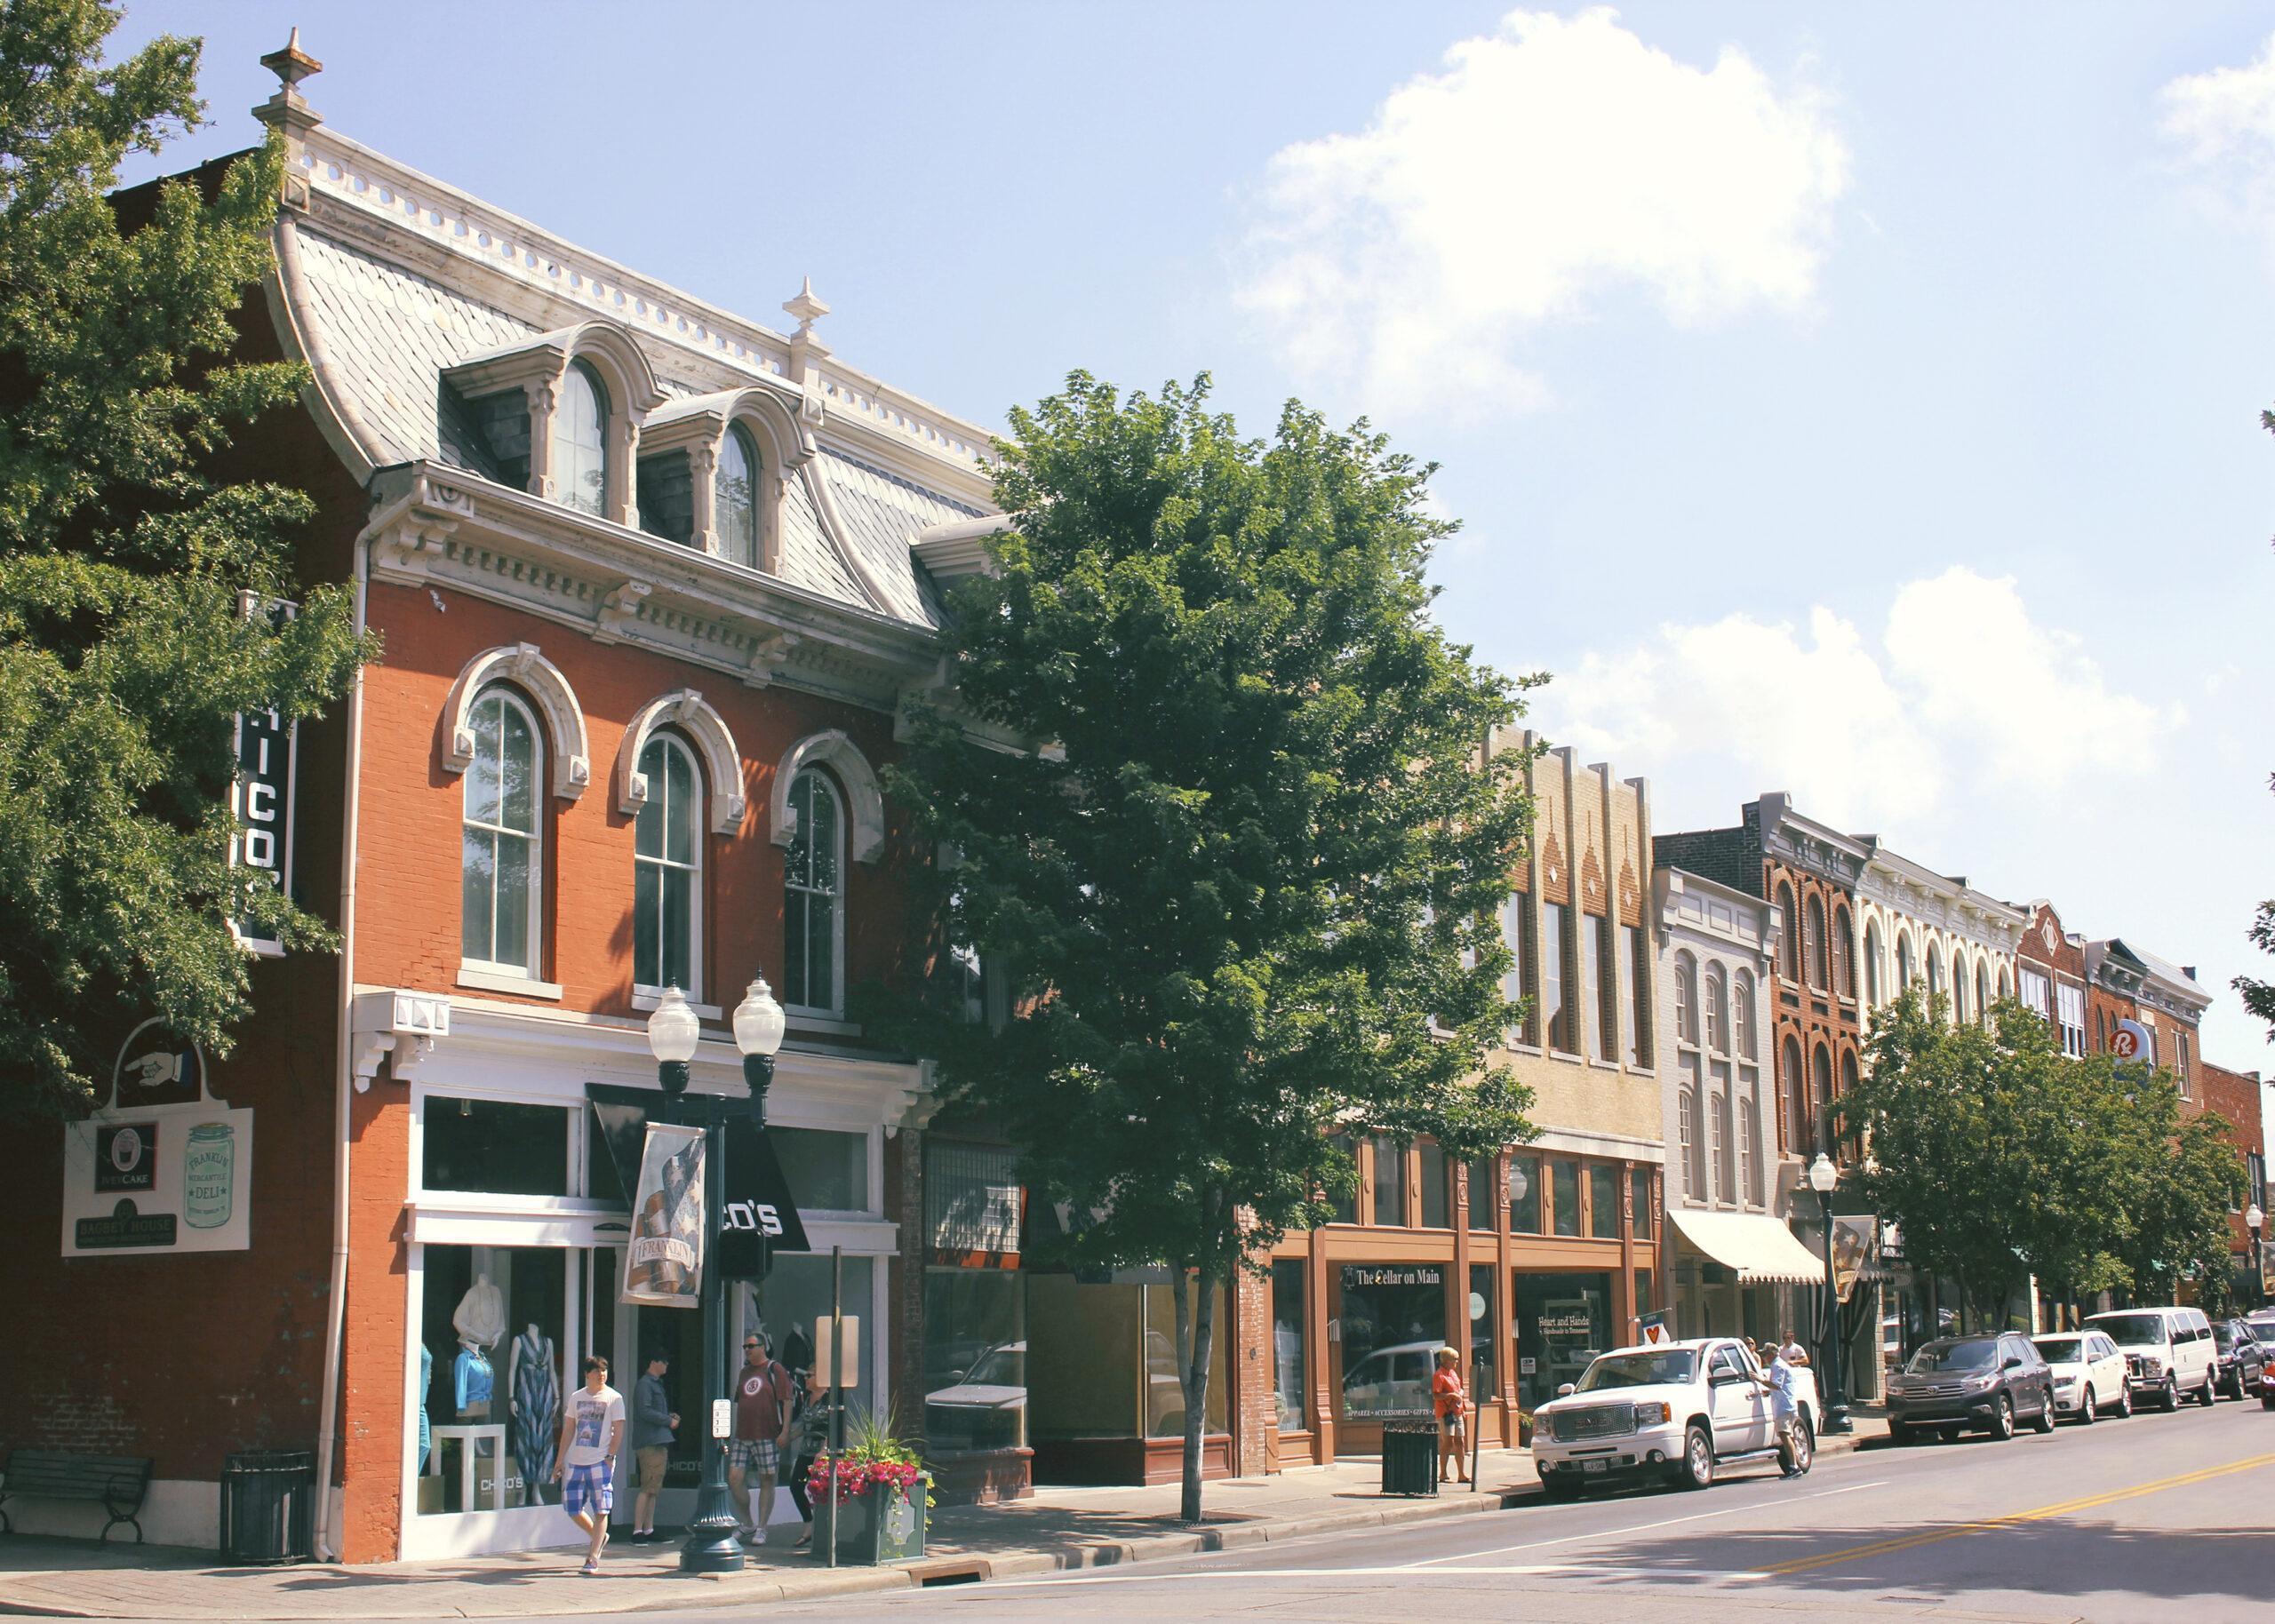 Main Street in Franklin, Tennessee. Photo courtesy Visit Franklin.